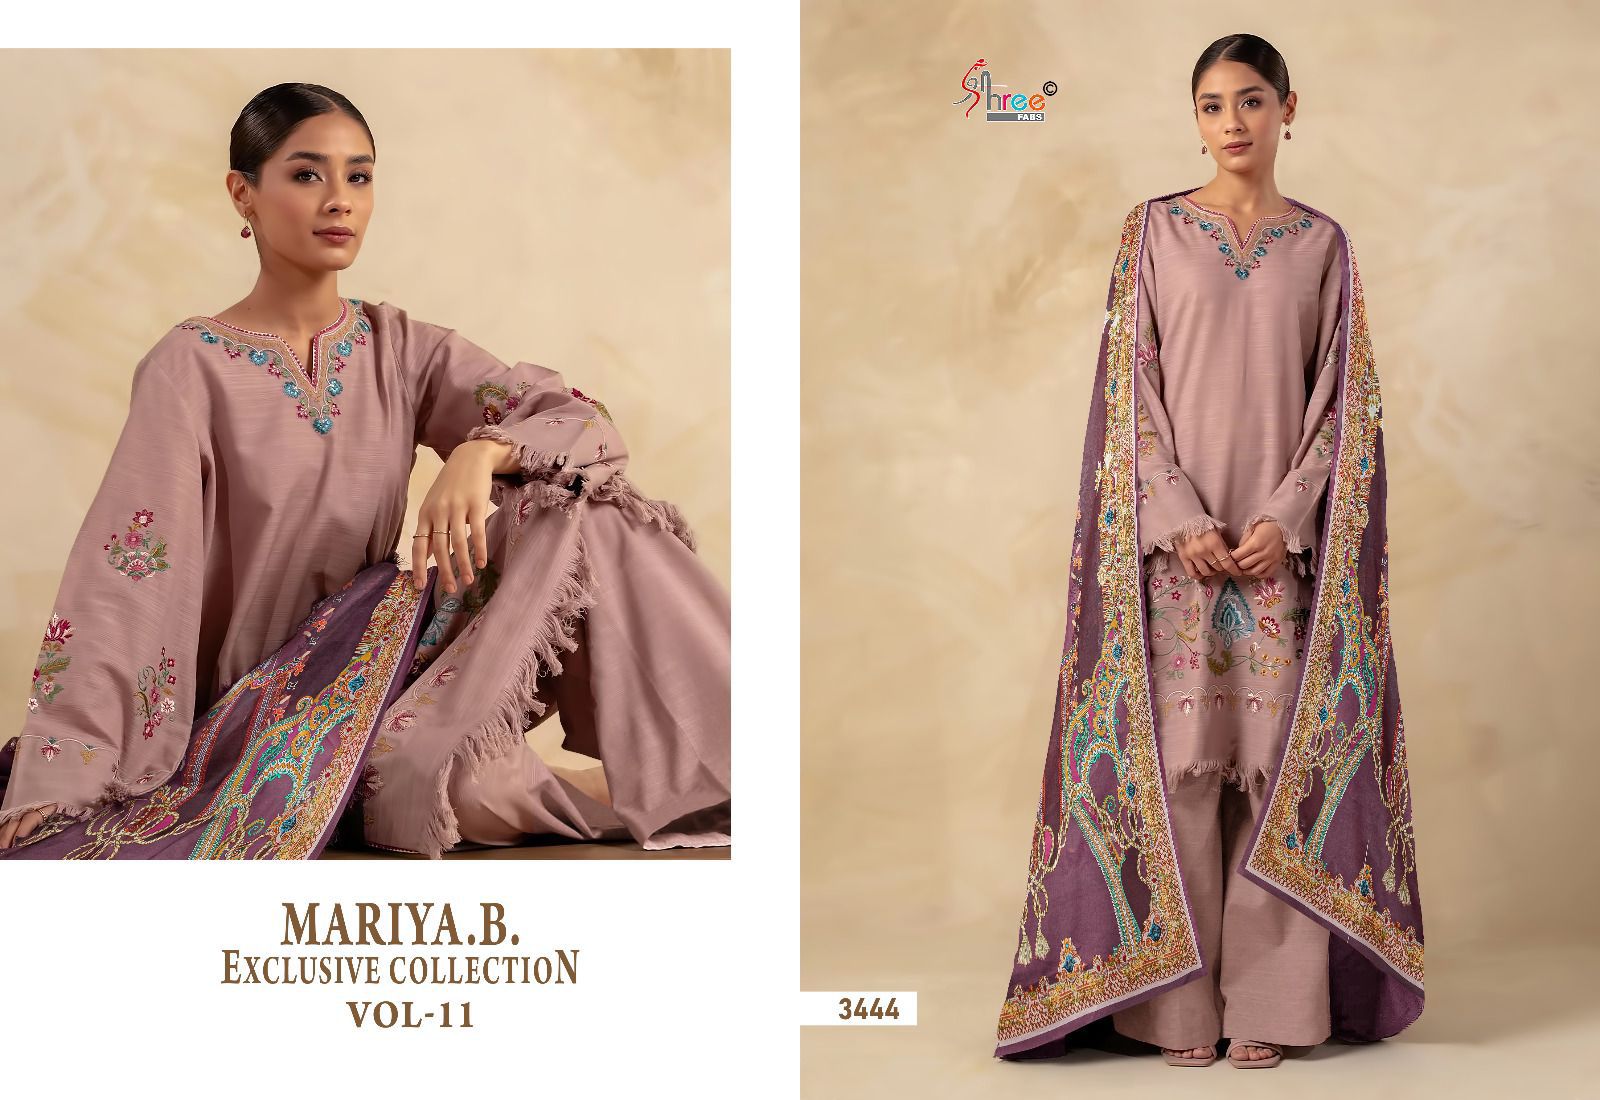 Shree Maria B Exclusive Collection Vol 11 collection 2